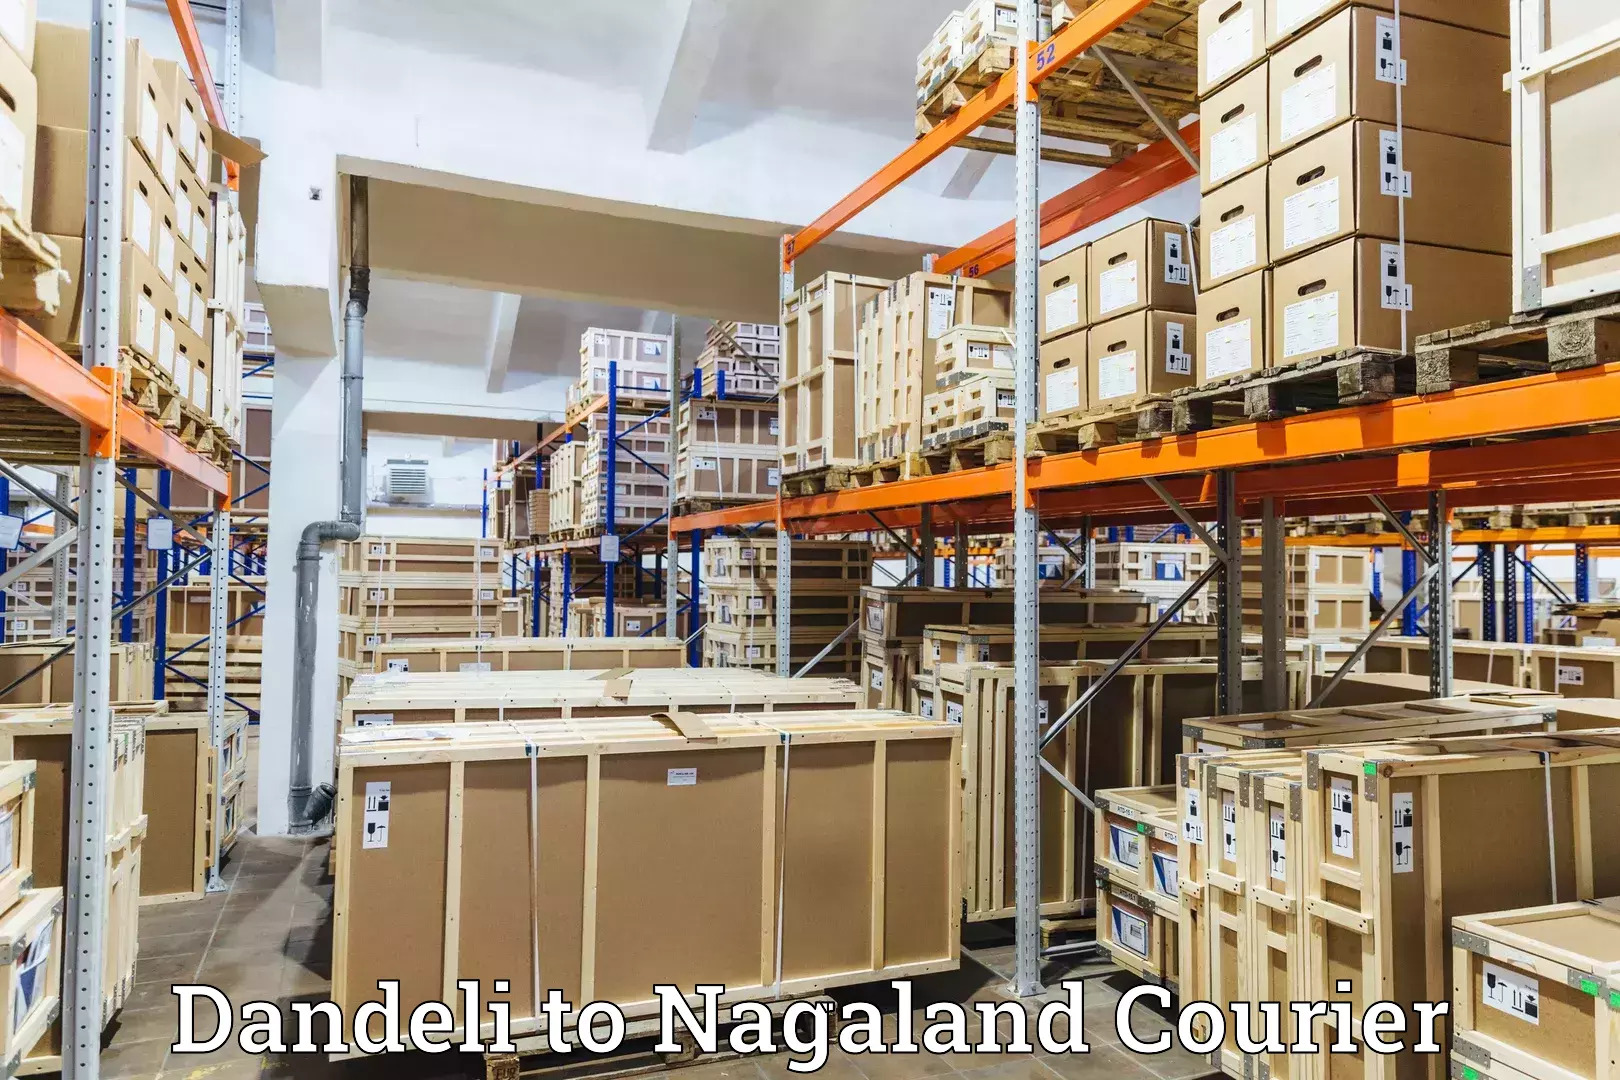 State-of-the-art courier technology Dandeli to Dimapur